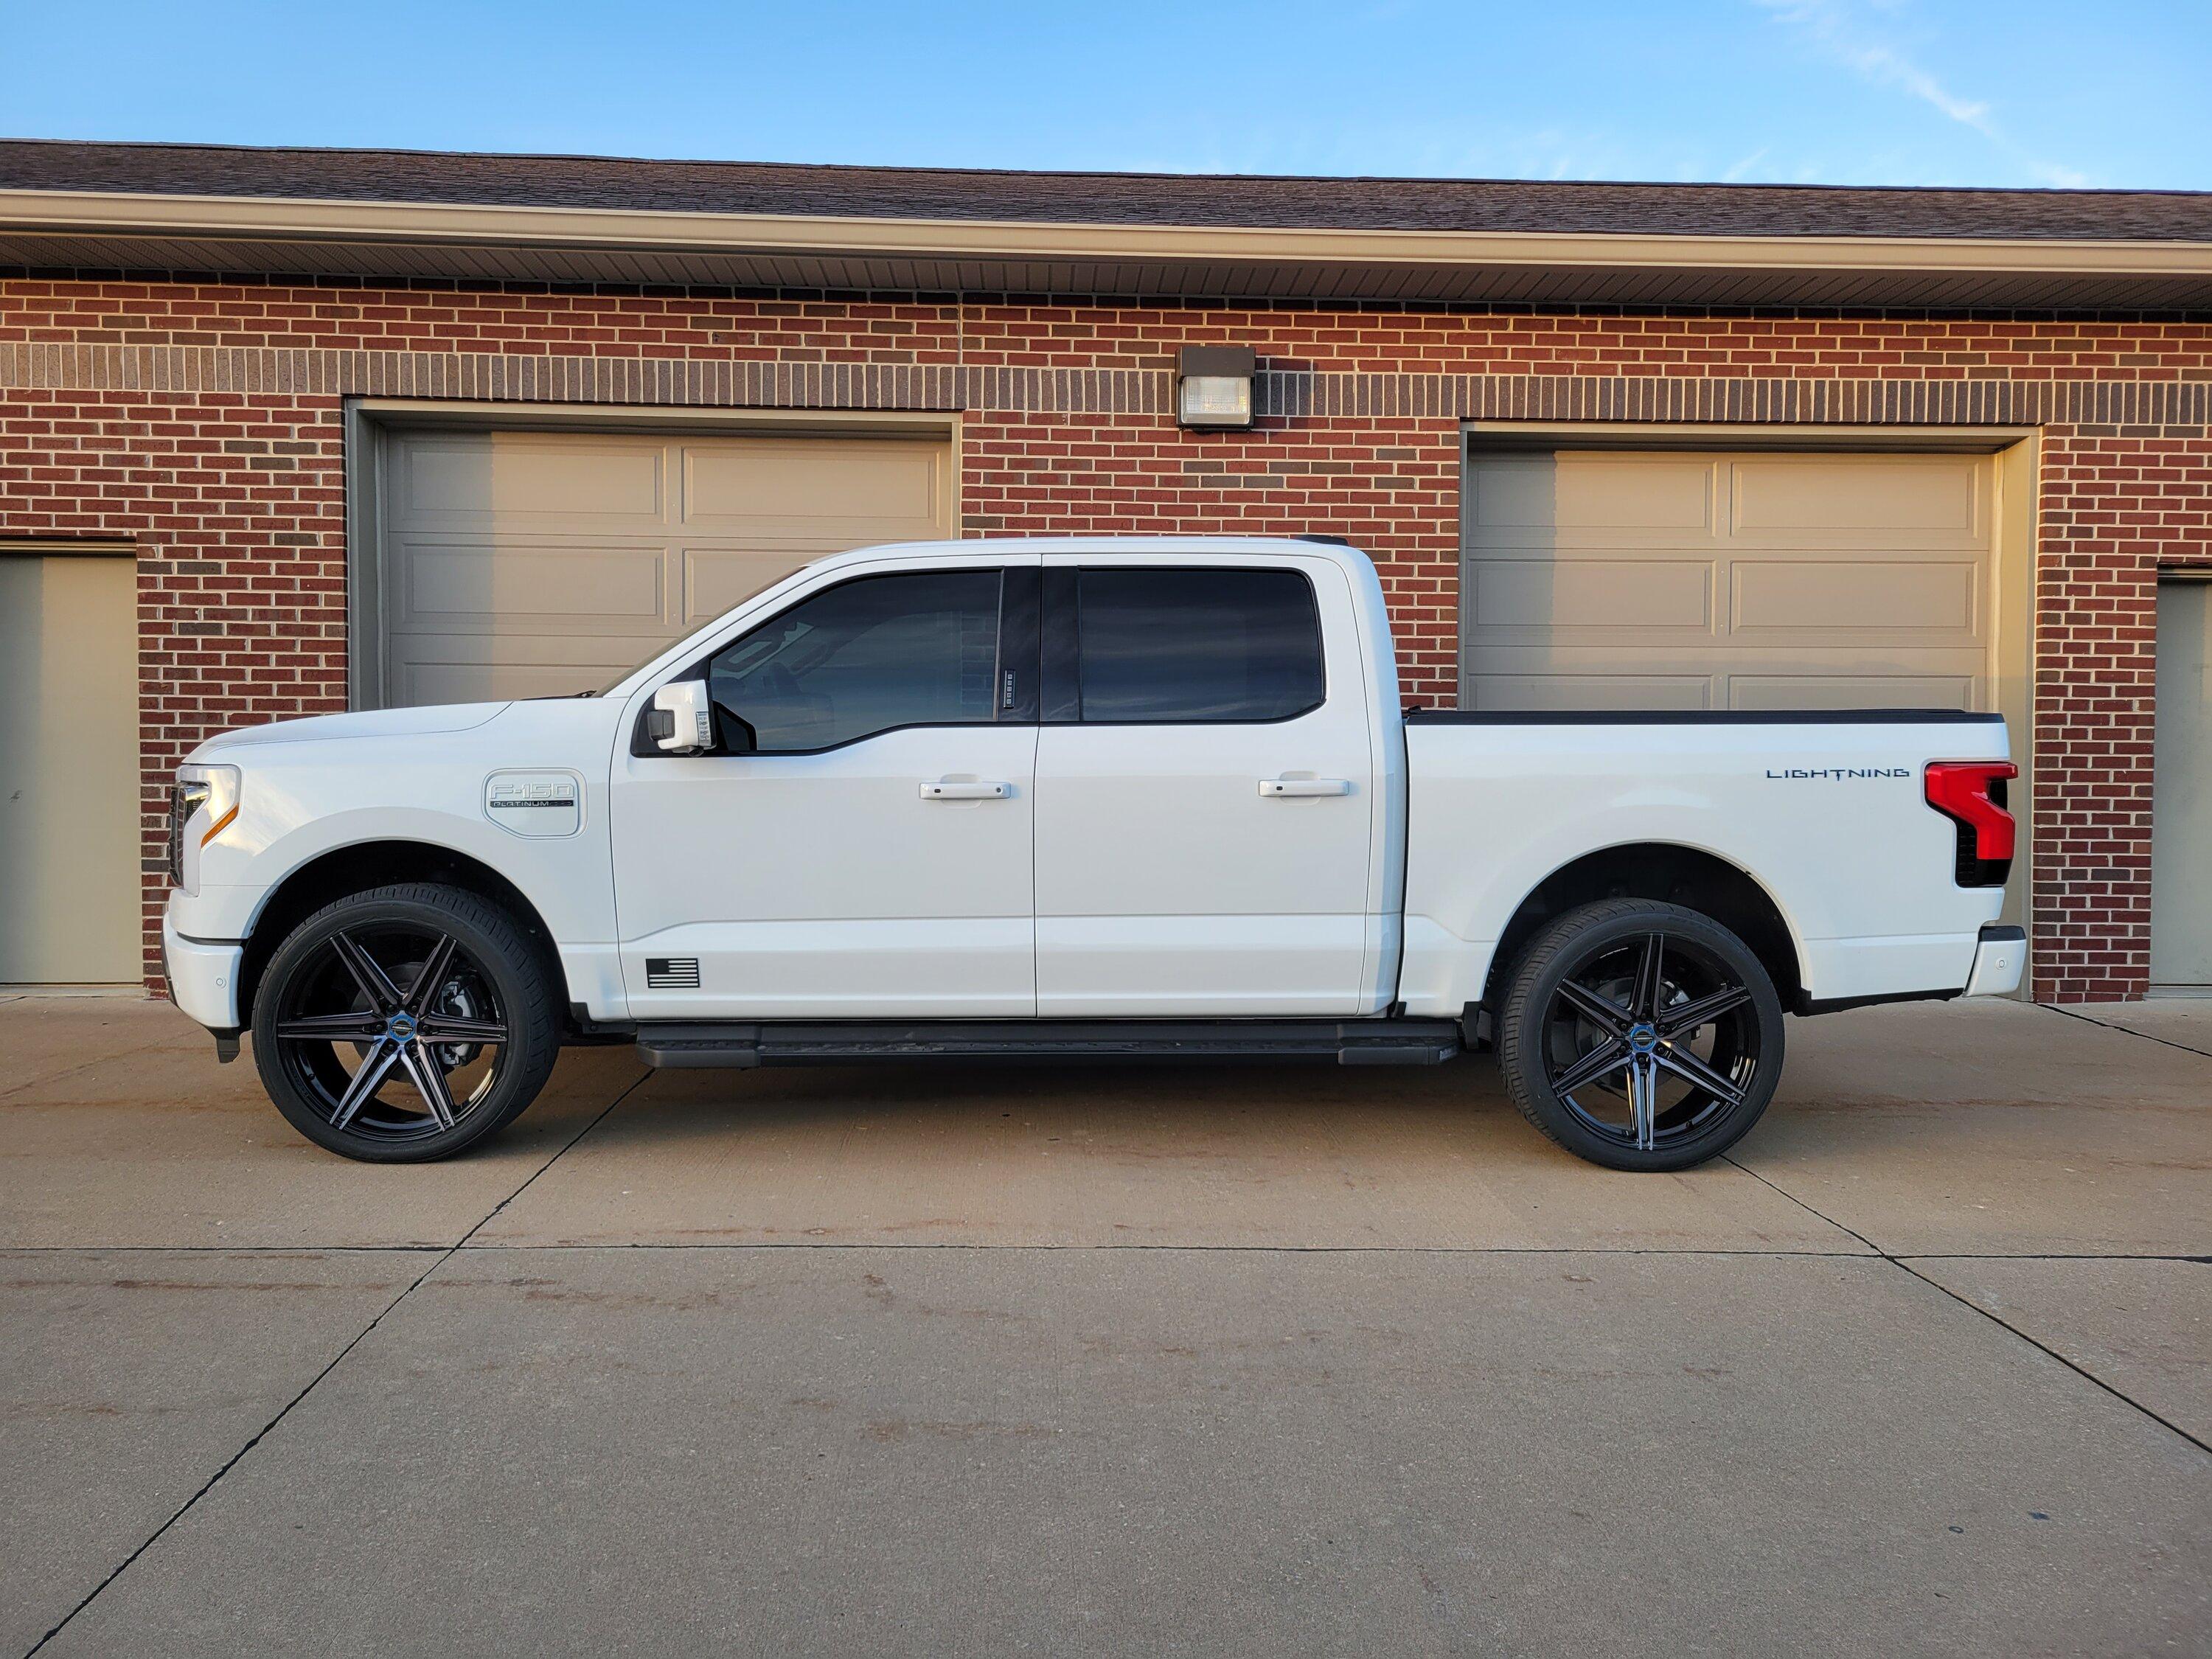 Ford F-150 Lightning Eibach R&D for Lightning lowering kit, leveling kit and lift kit -- submit your input 20230116_165206